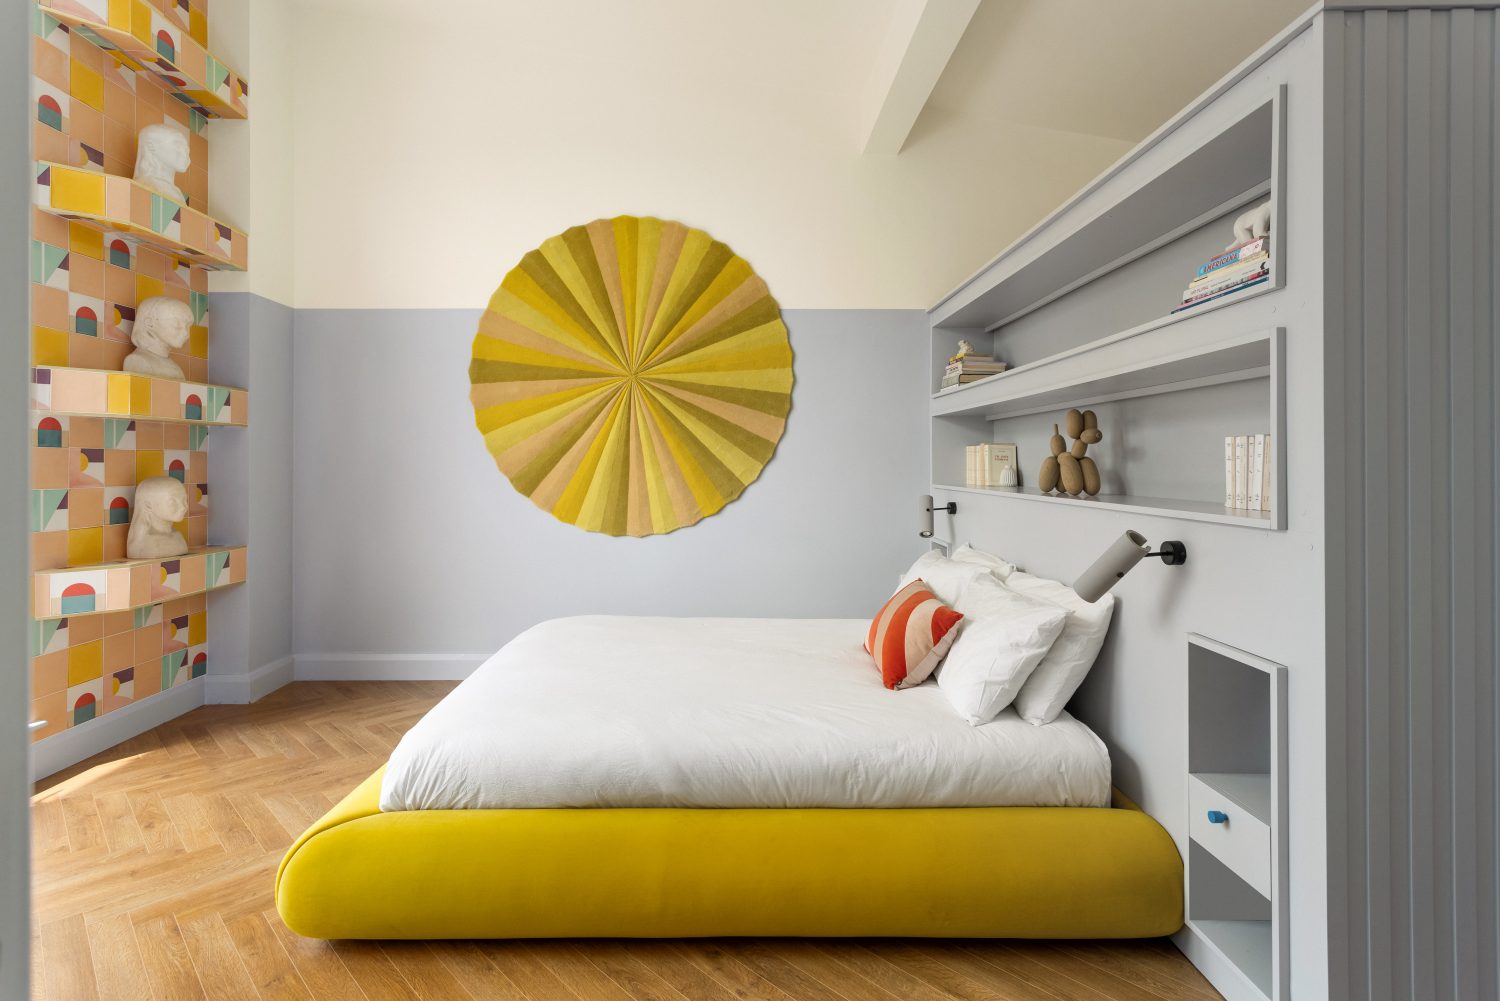 Chroma Yellow rug by Kitty Joseph used as wall art to help with acoustics of the high-ceiling space.